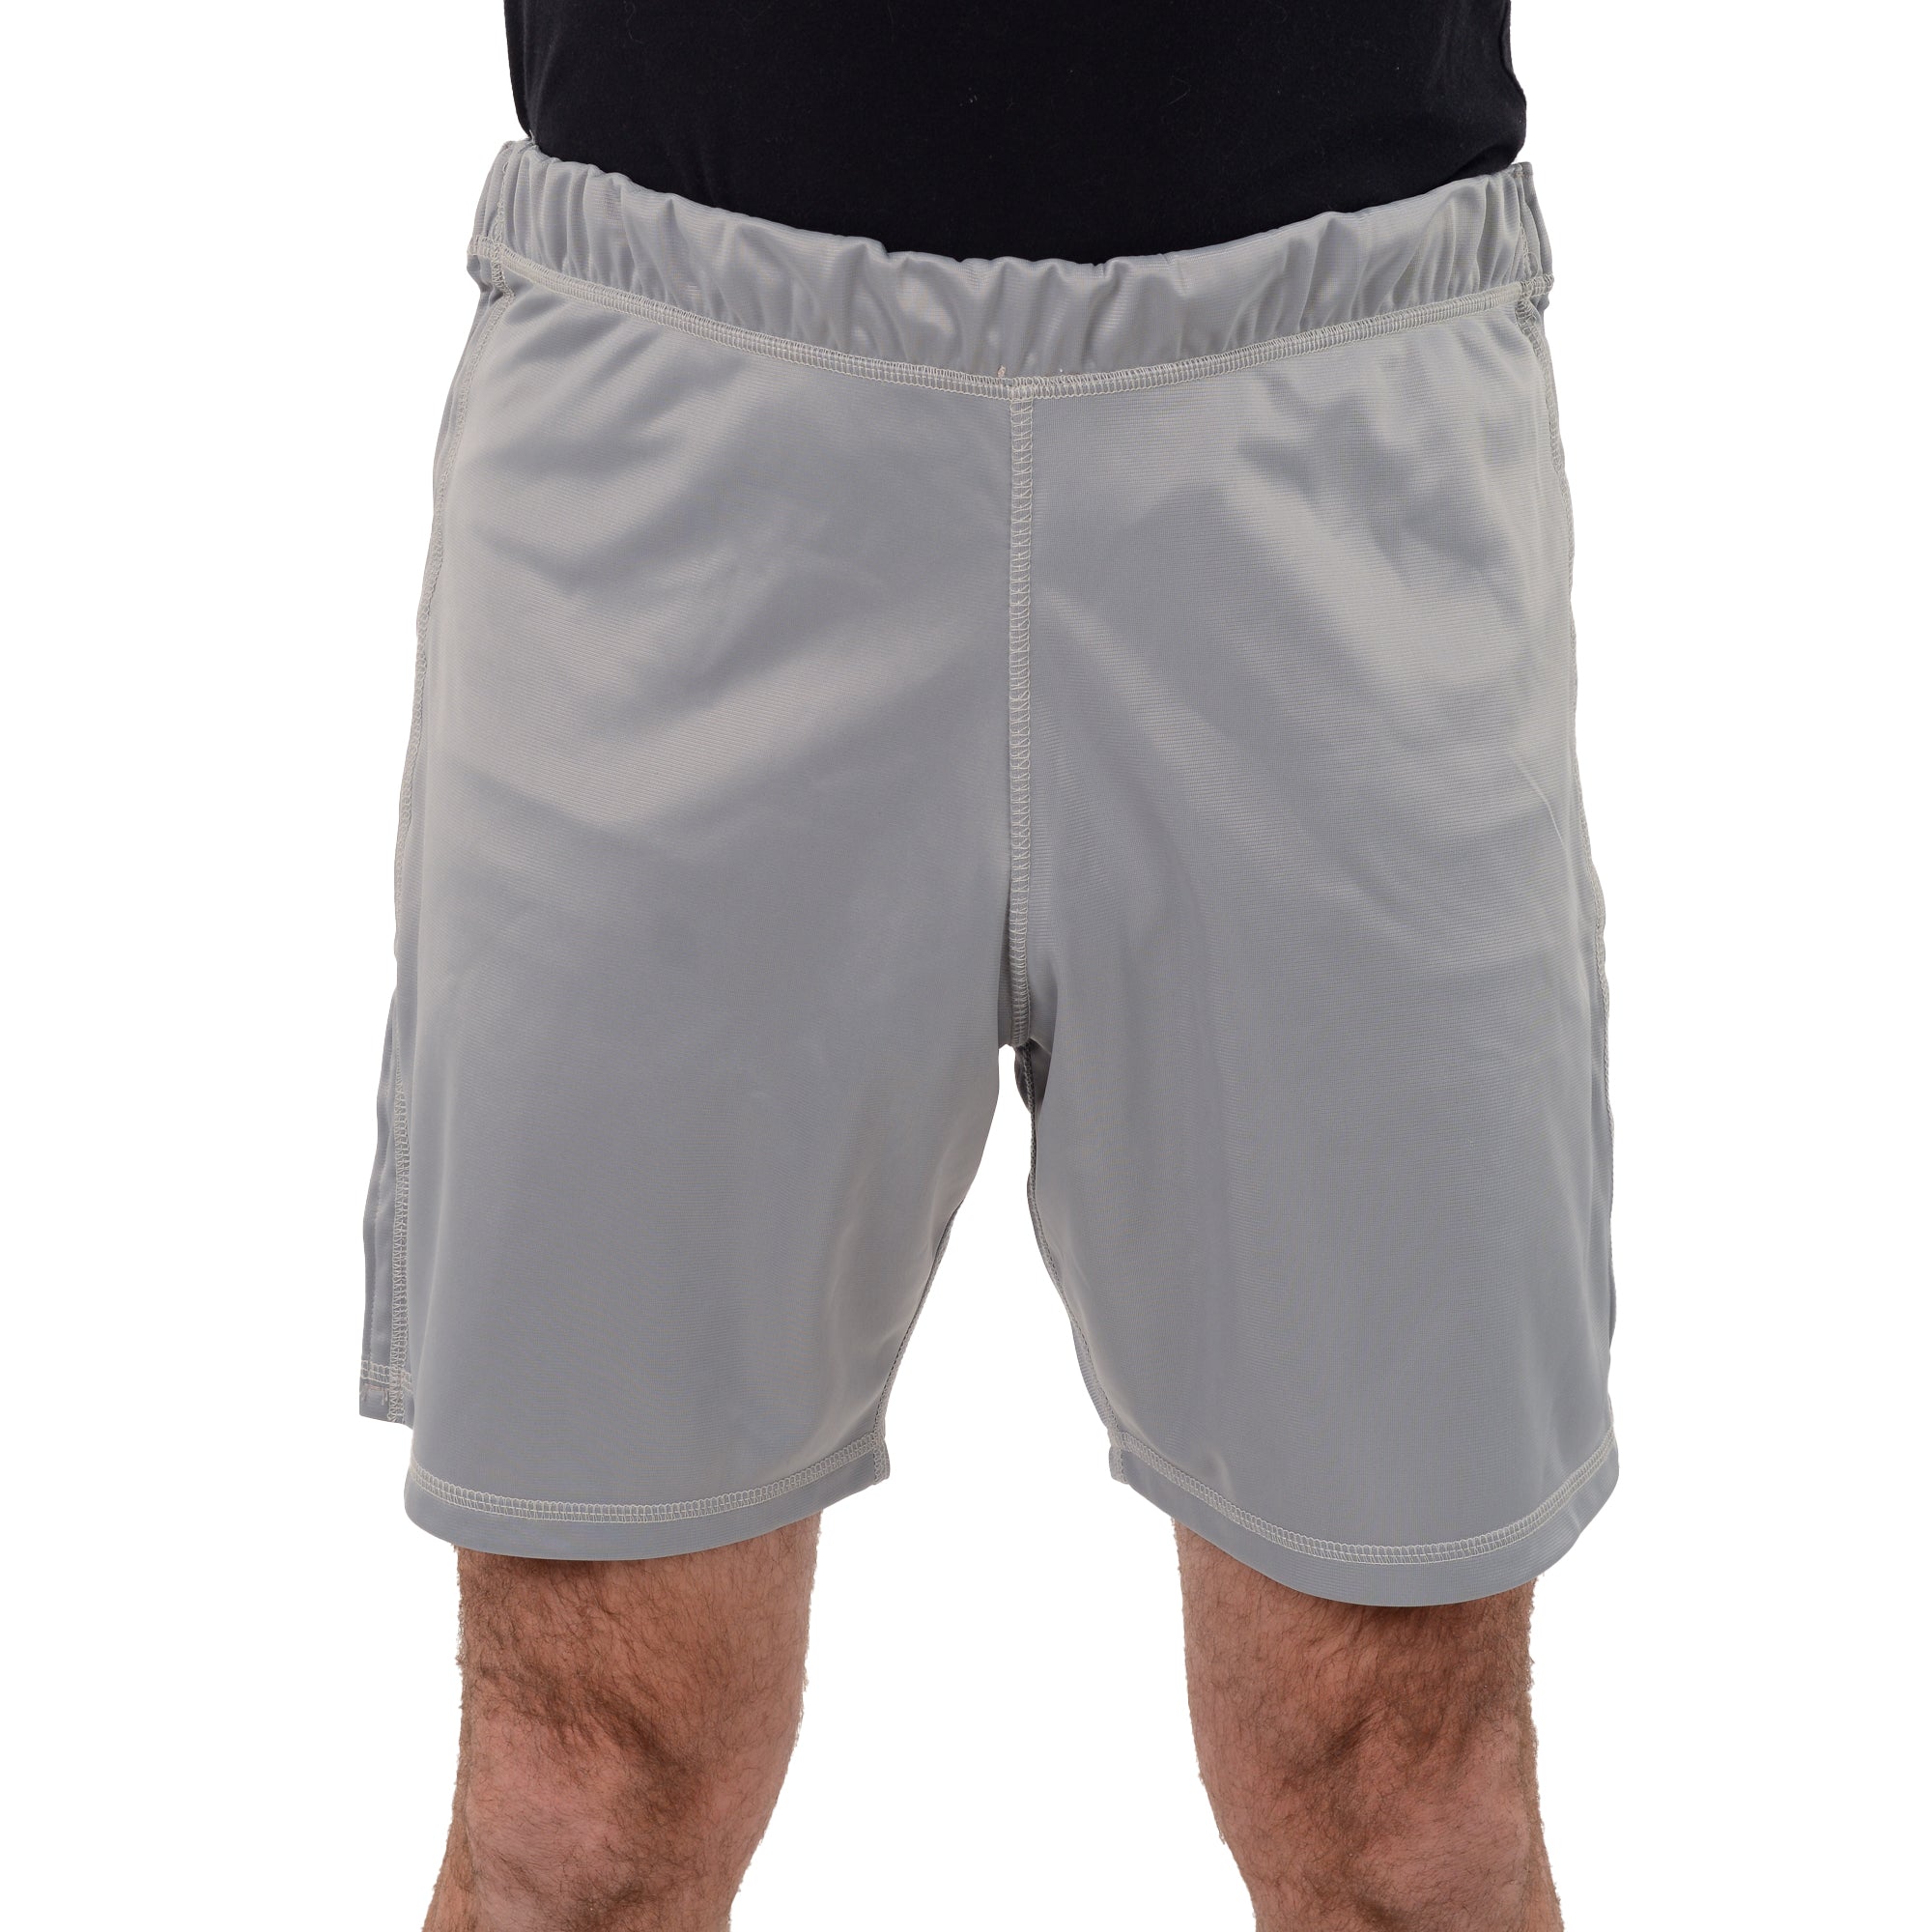 Post Medical Surgery Specialize Tearaway recovery shorts Pant for men